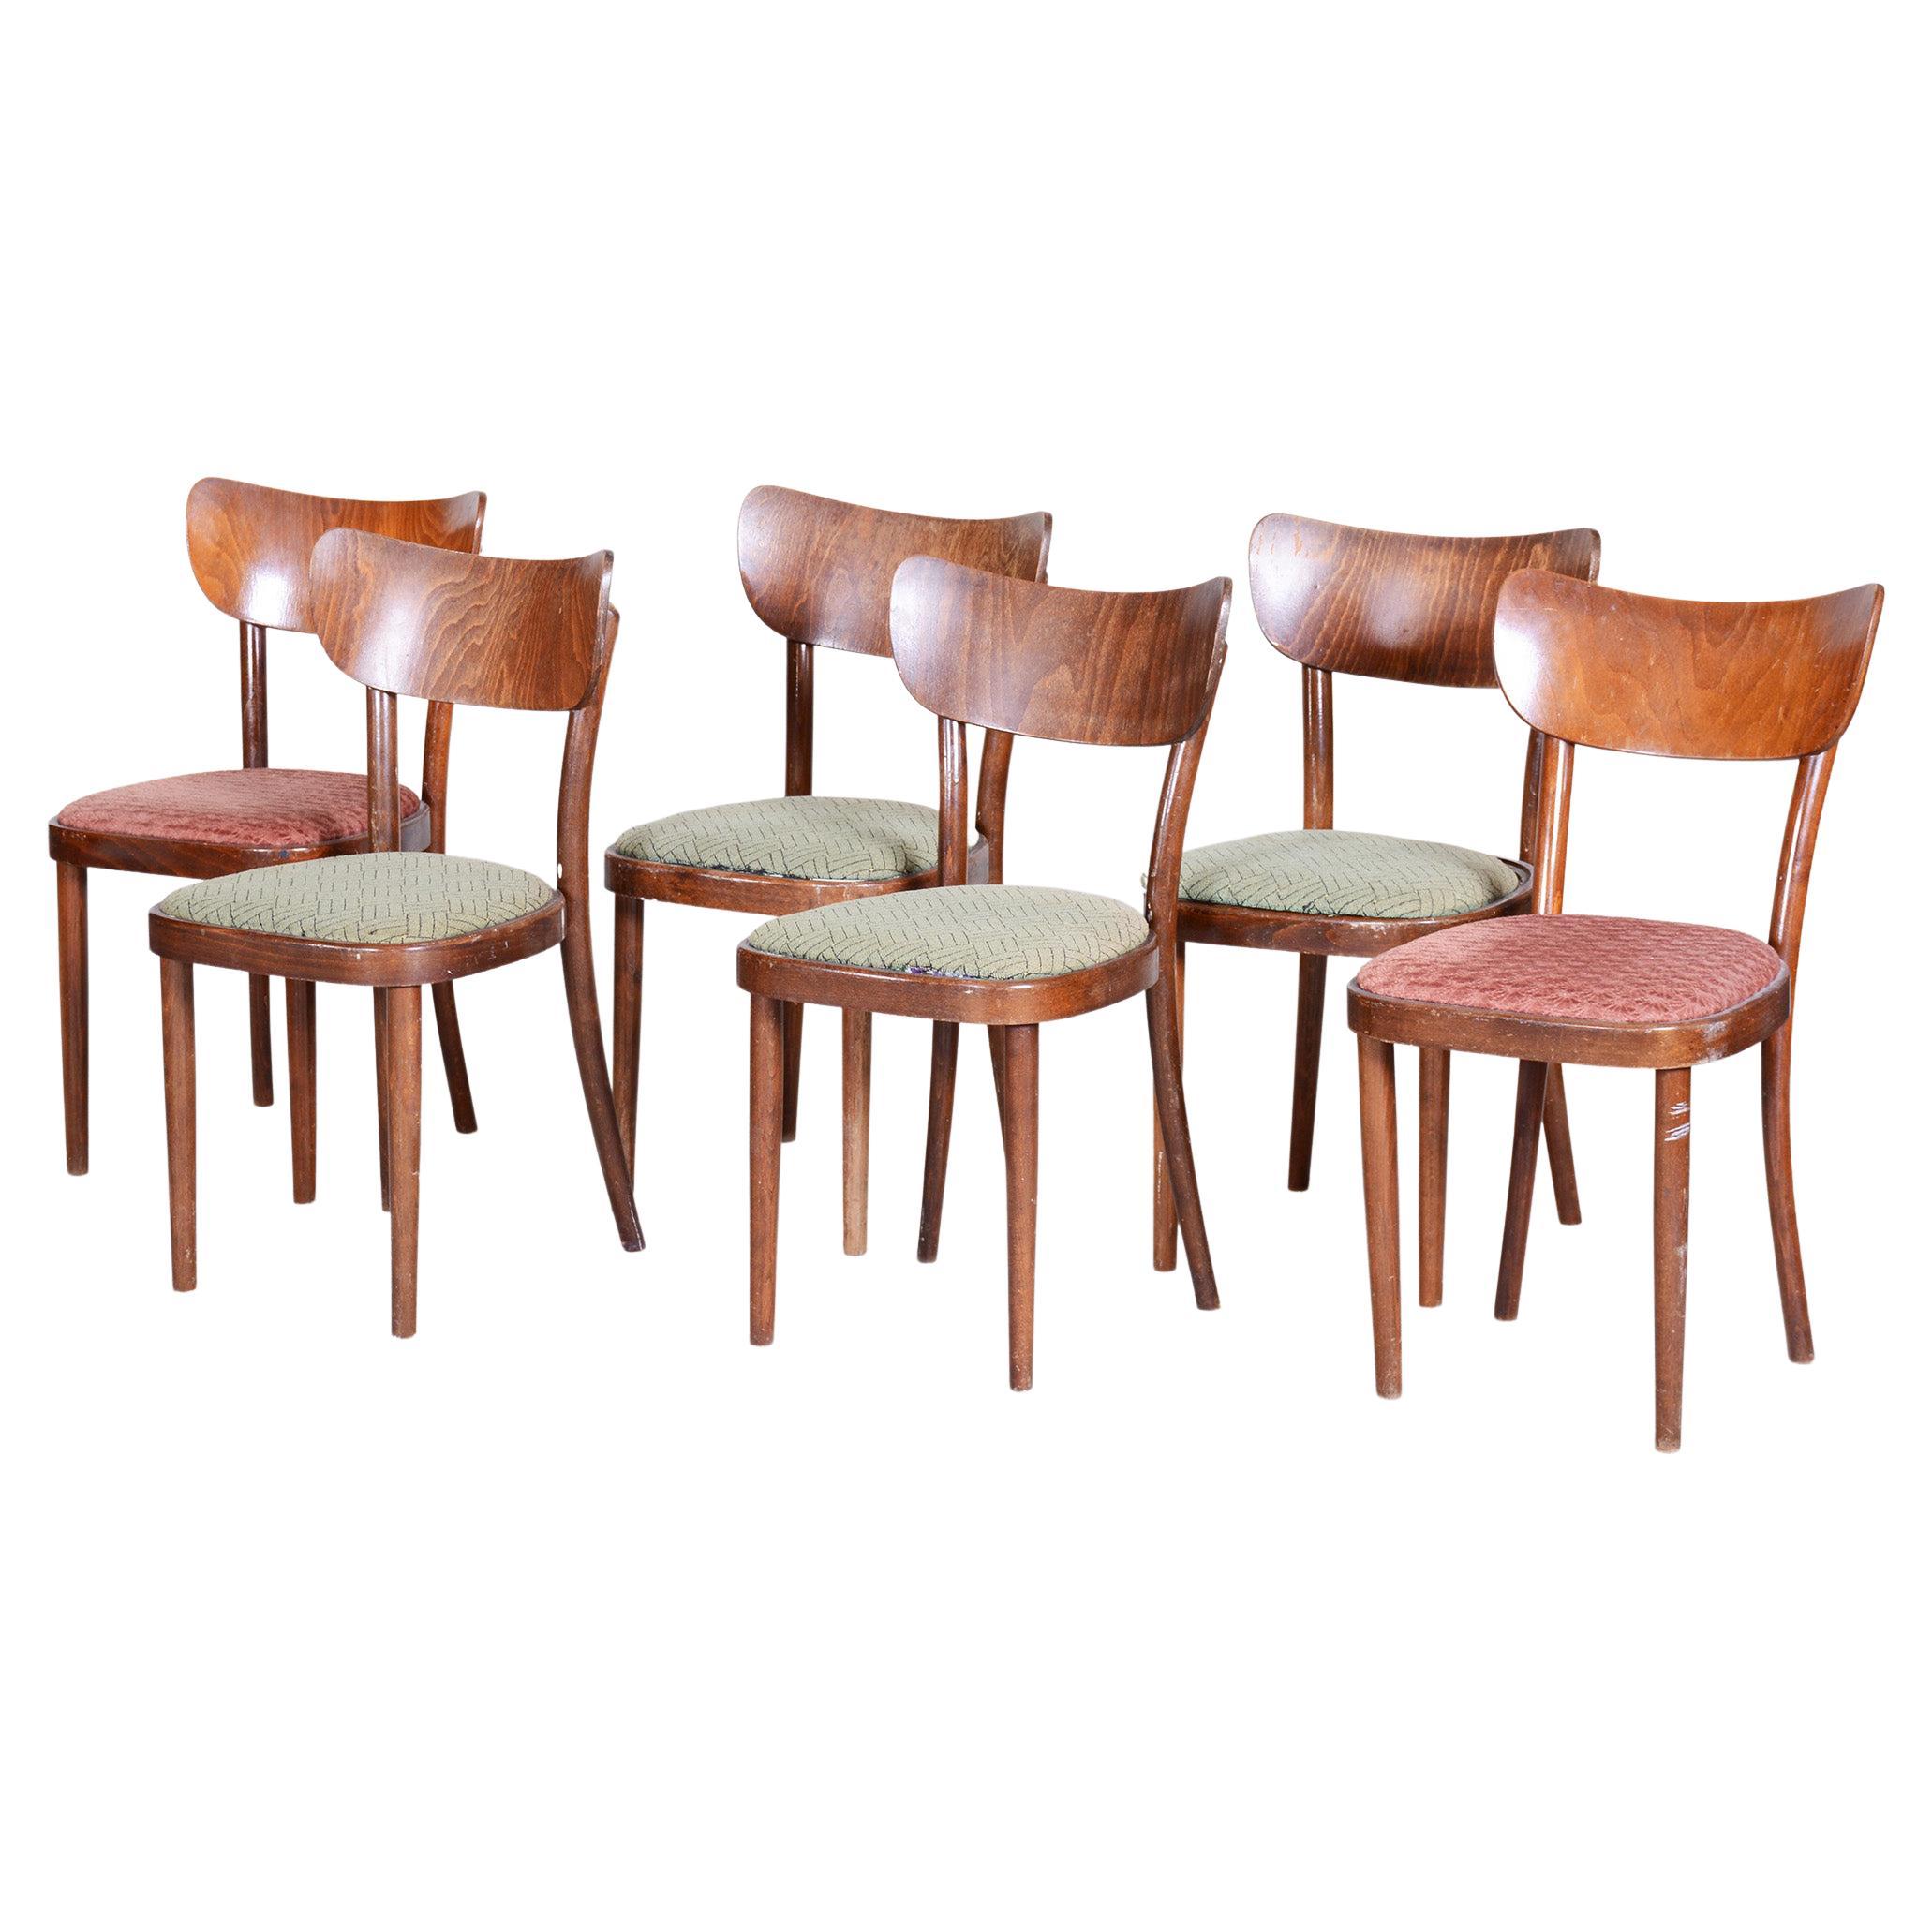 Set of 6 Dining Chairs Made by TON - 1940s, Czechia For Sale